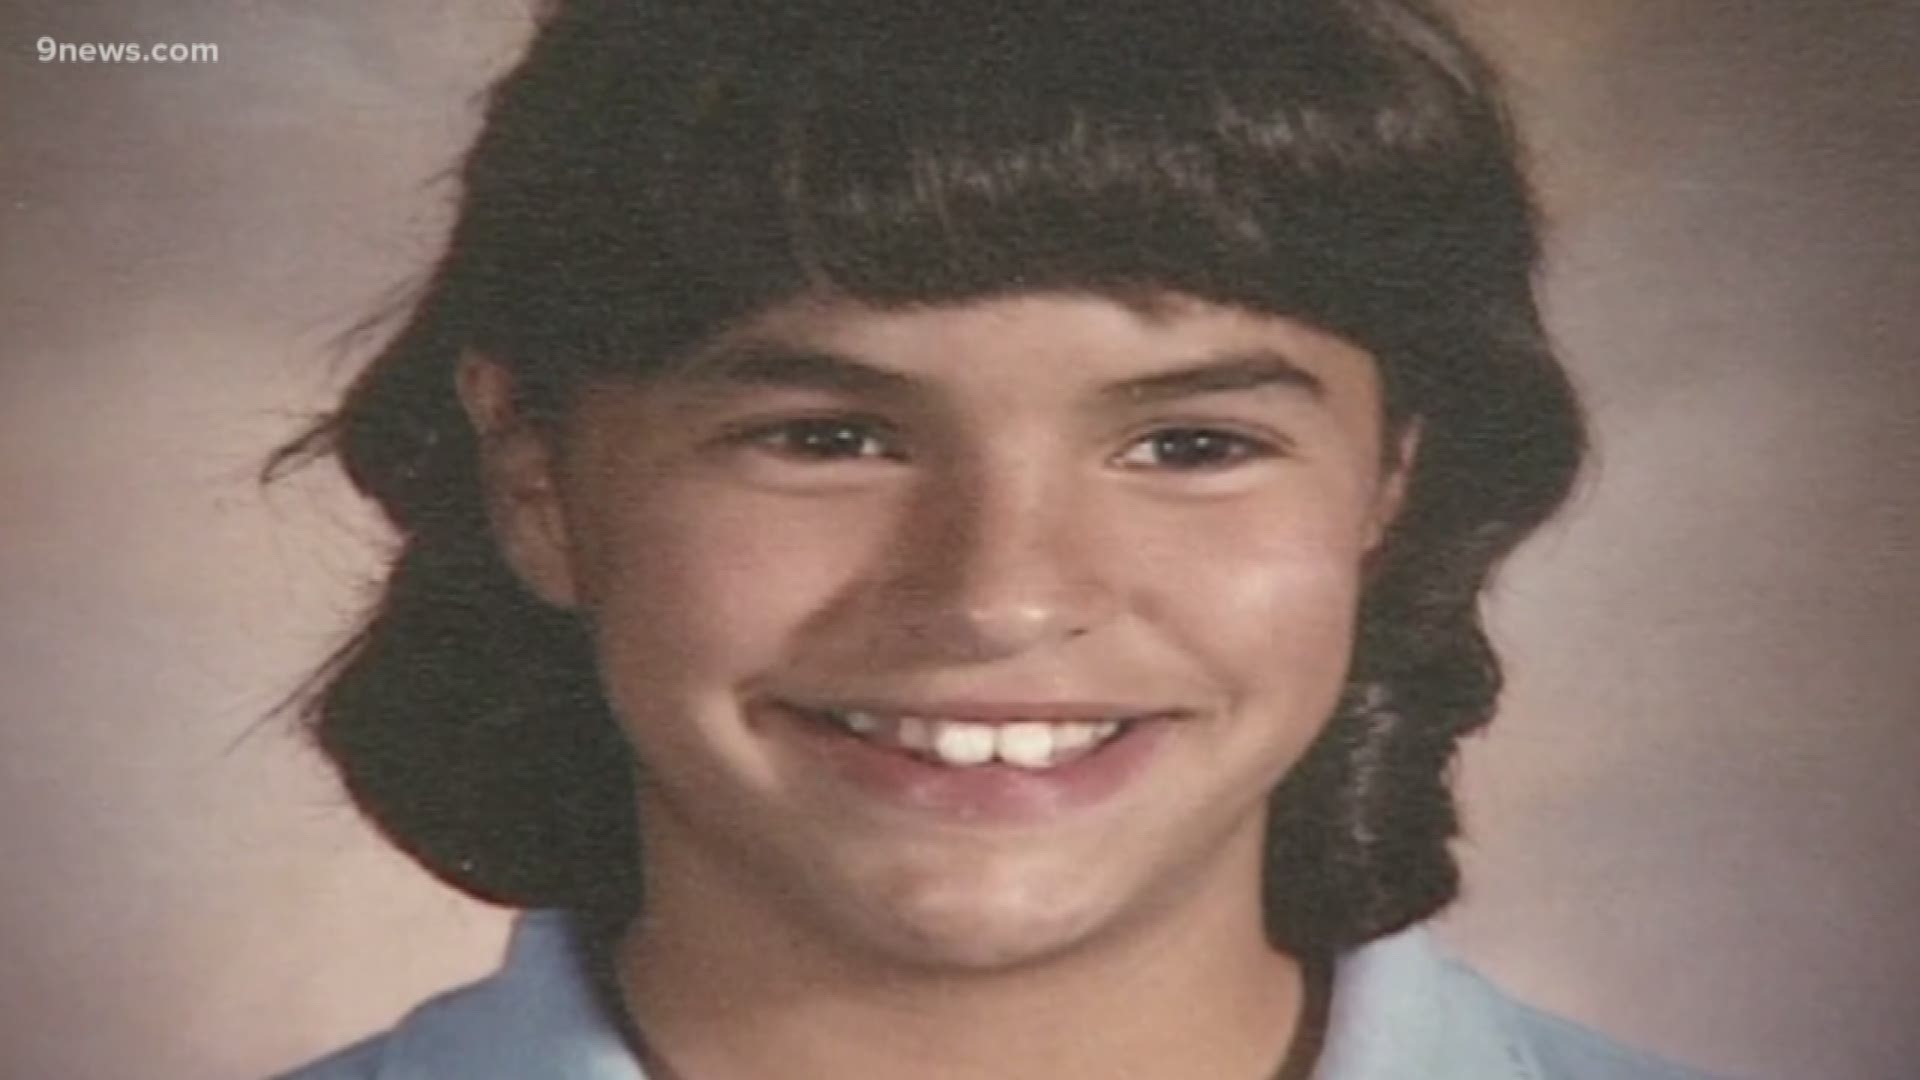 Jonelle Matthews was 12 when she disappeared in 1984. Her bones were discovered this week at an oil and gas site.